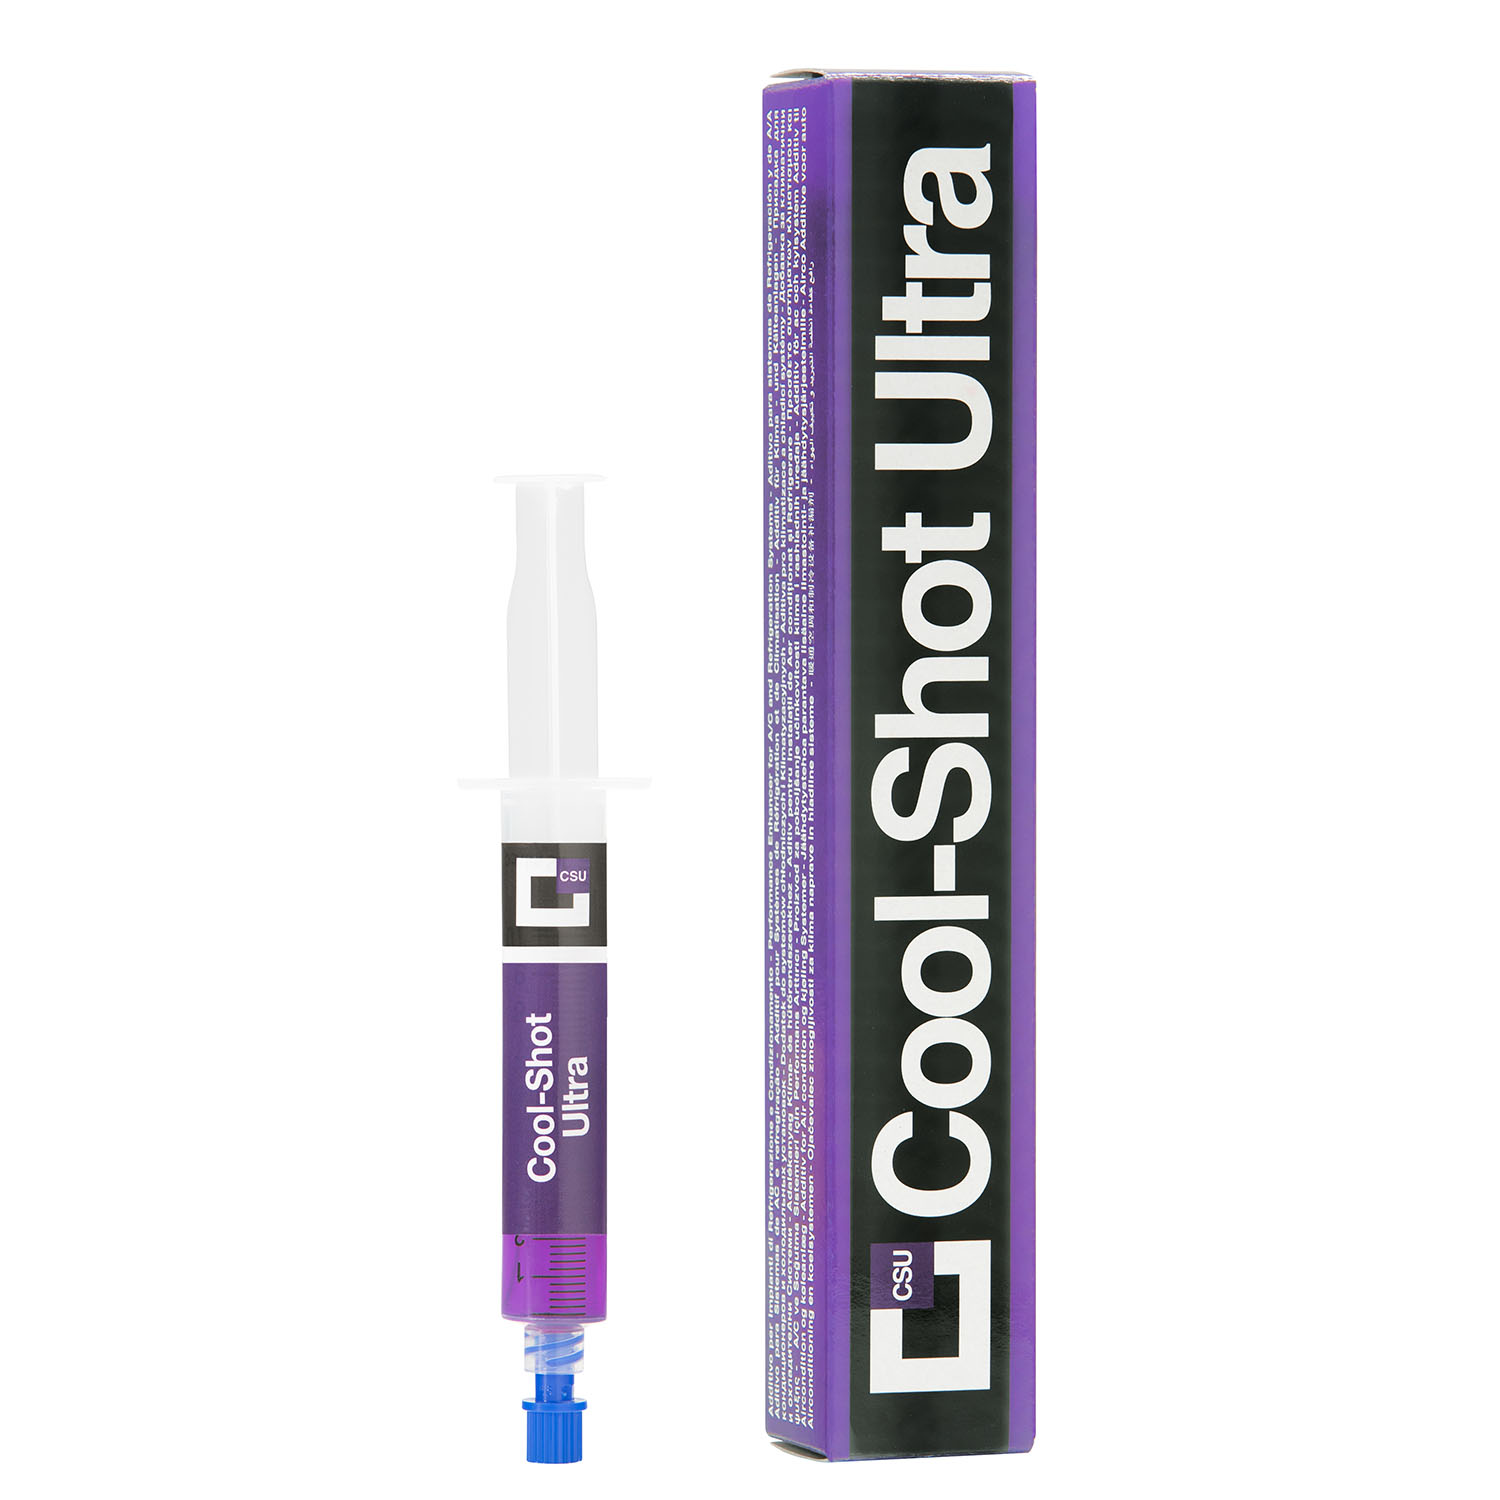 Performance Enhancer (without adapters) - COOL SHOT ULTRA - Cartridge 6 ml - Package # 1 pc.